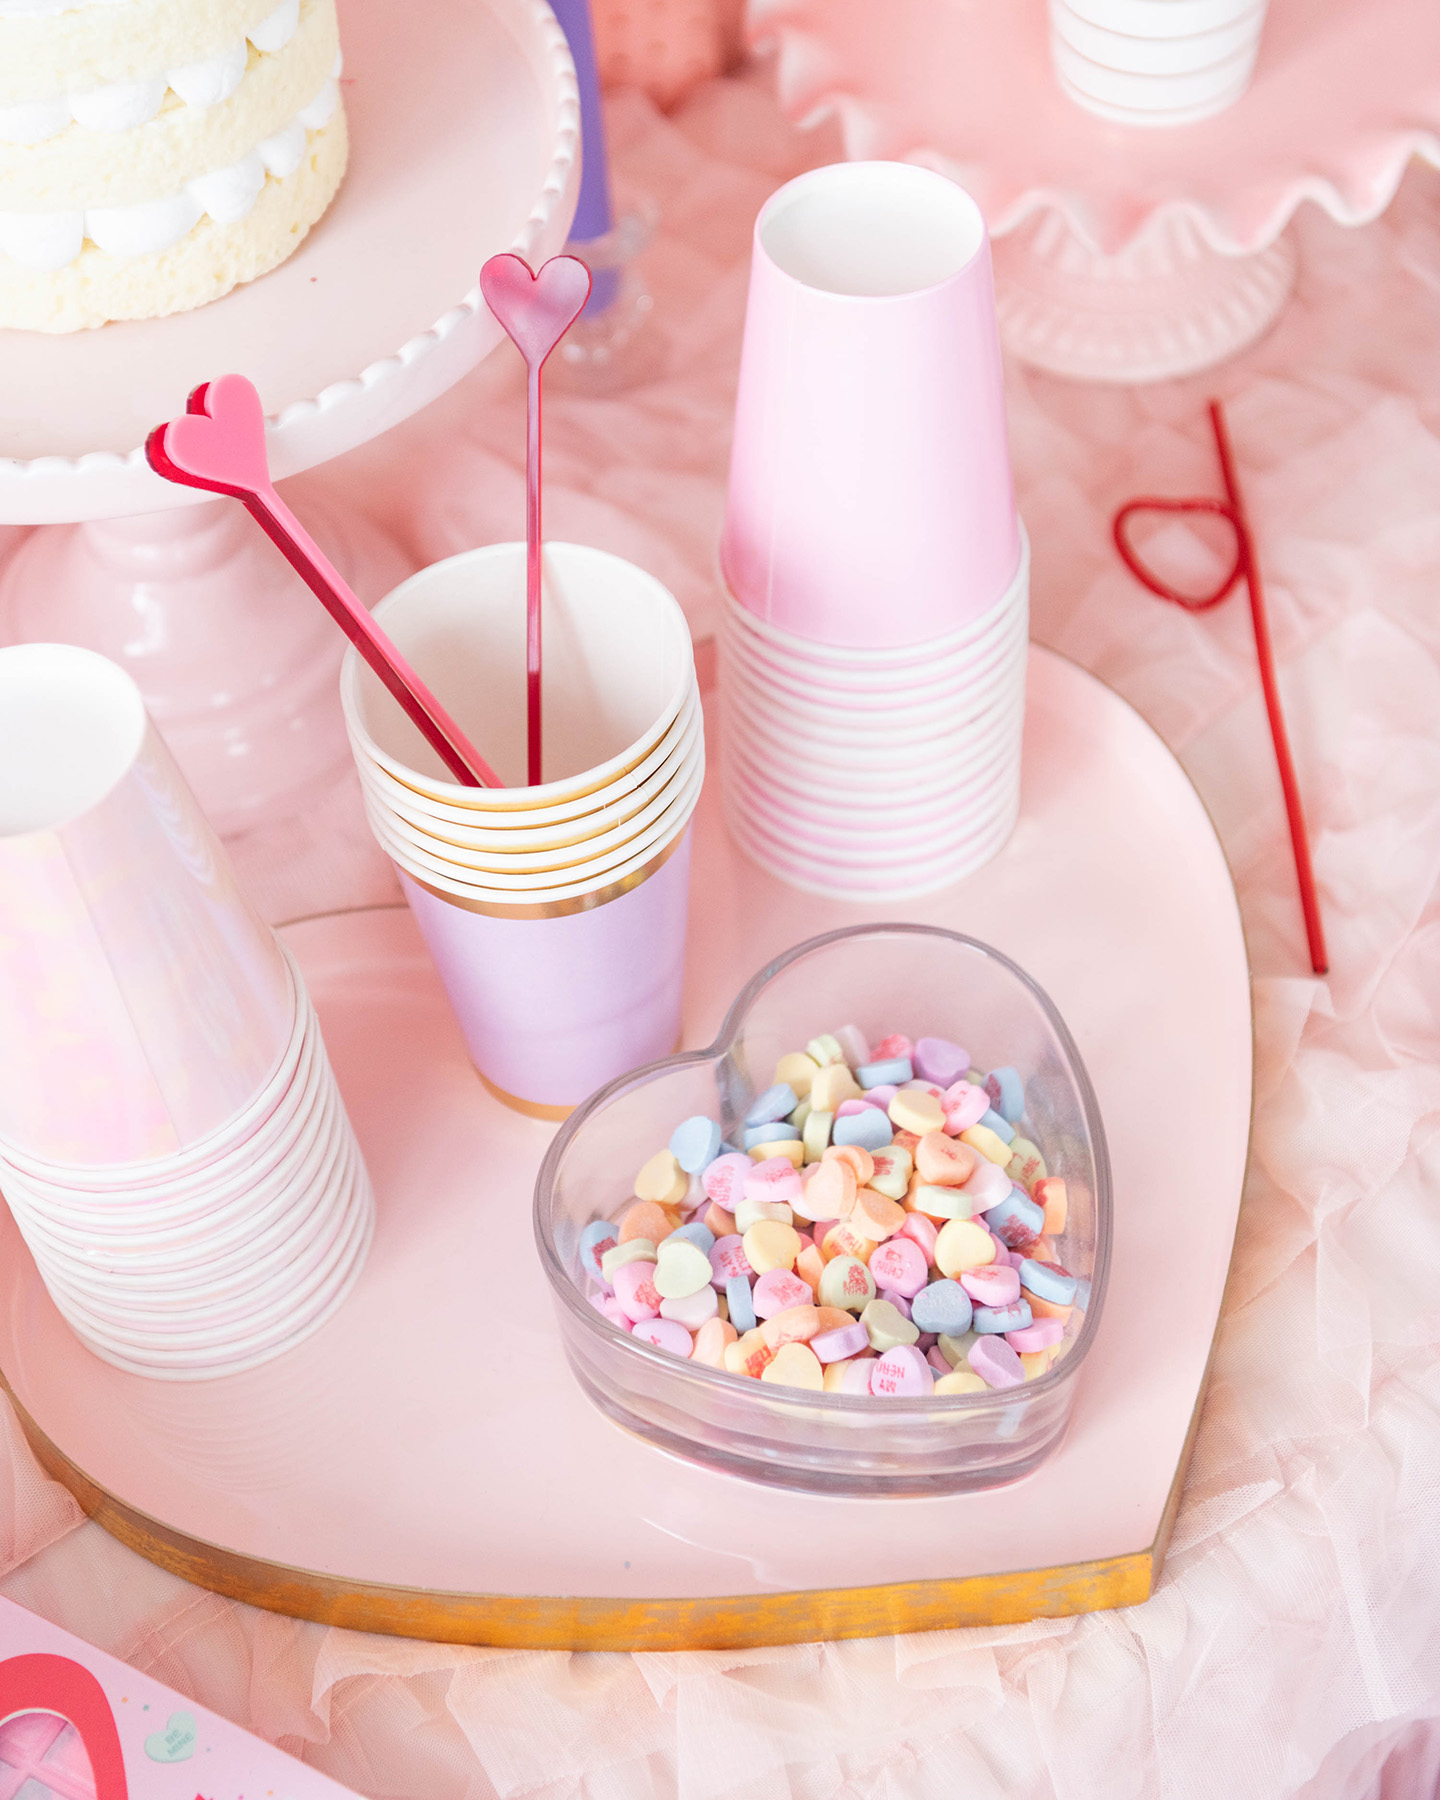 Jollity Valentine's Day cups on serving tray